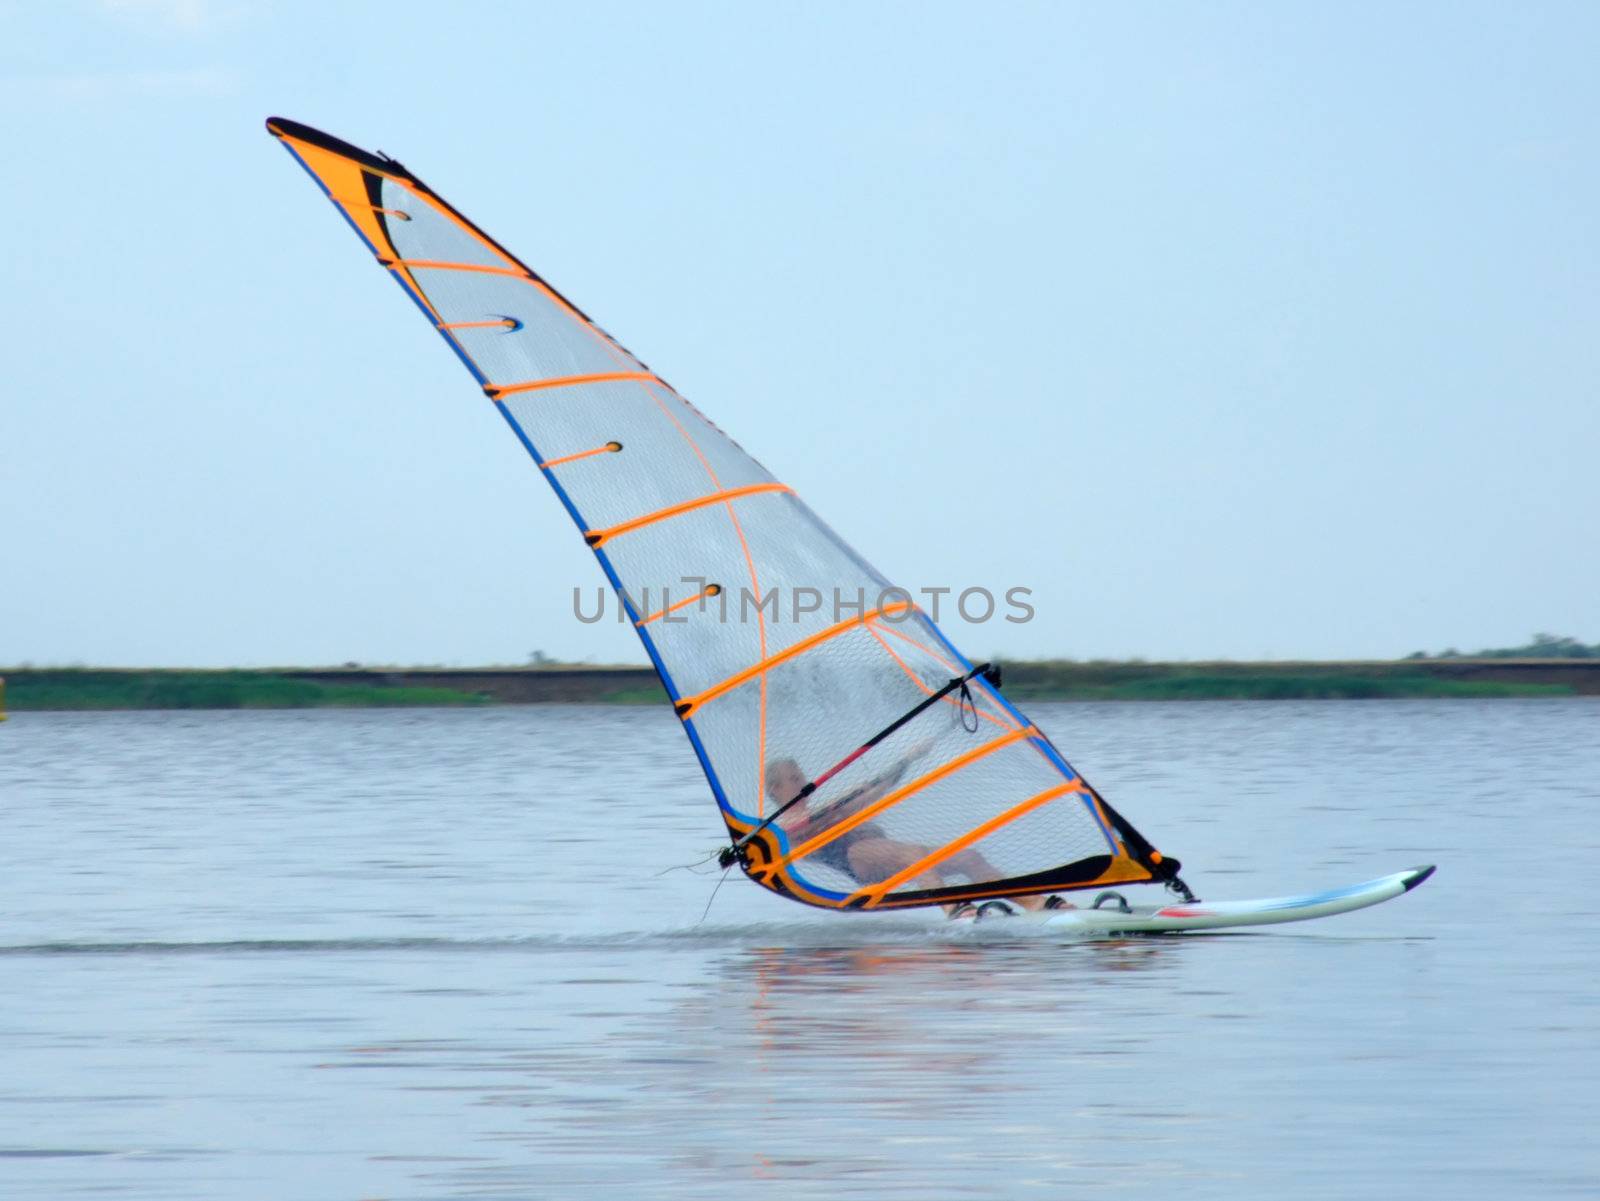 windsurfer on waves of a gulf in the afternoon